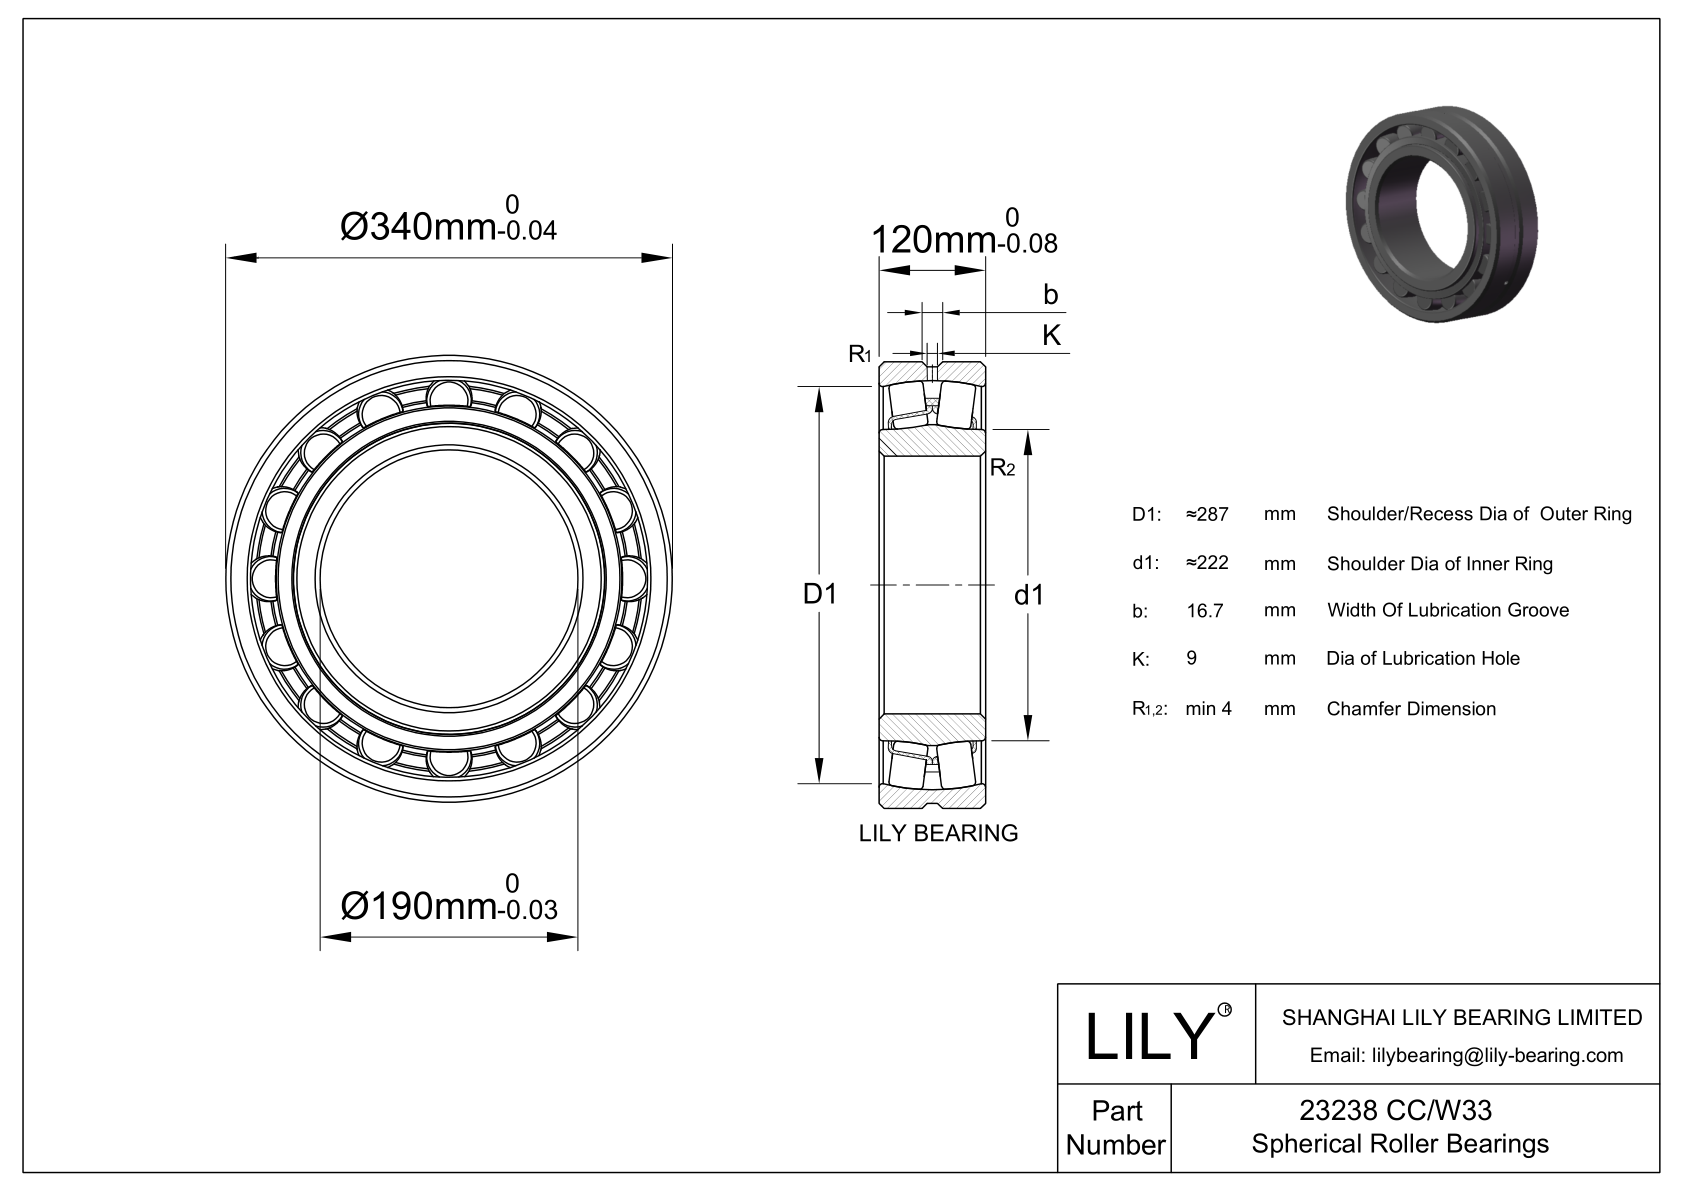 23238 CC/W33 Double Row Spherical Roller Bearing cad drawing